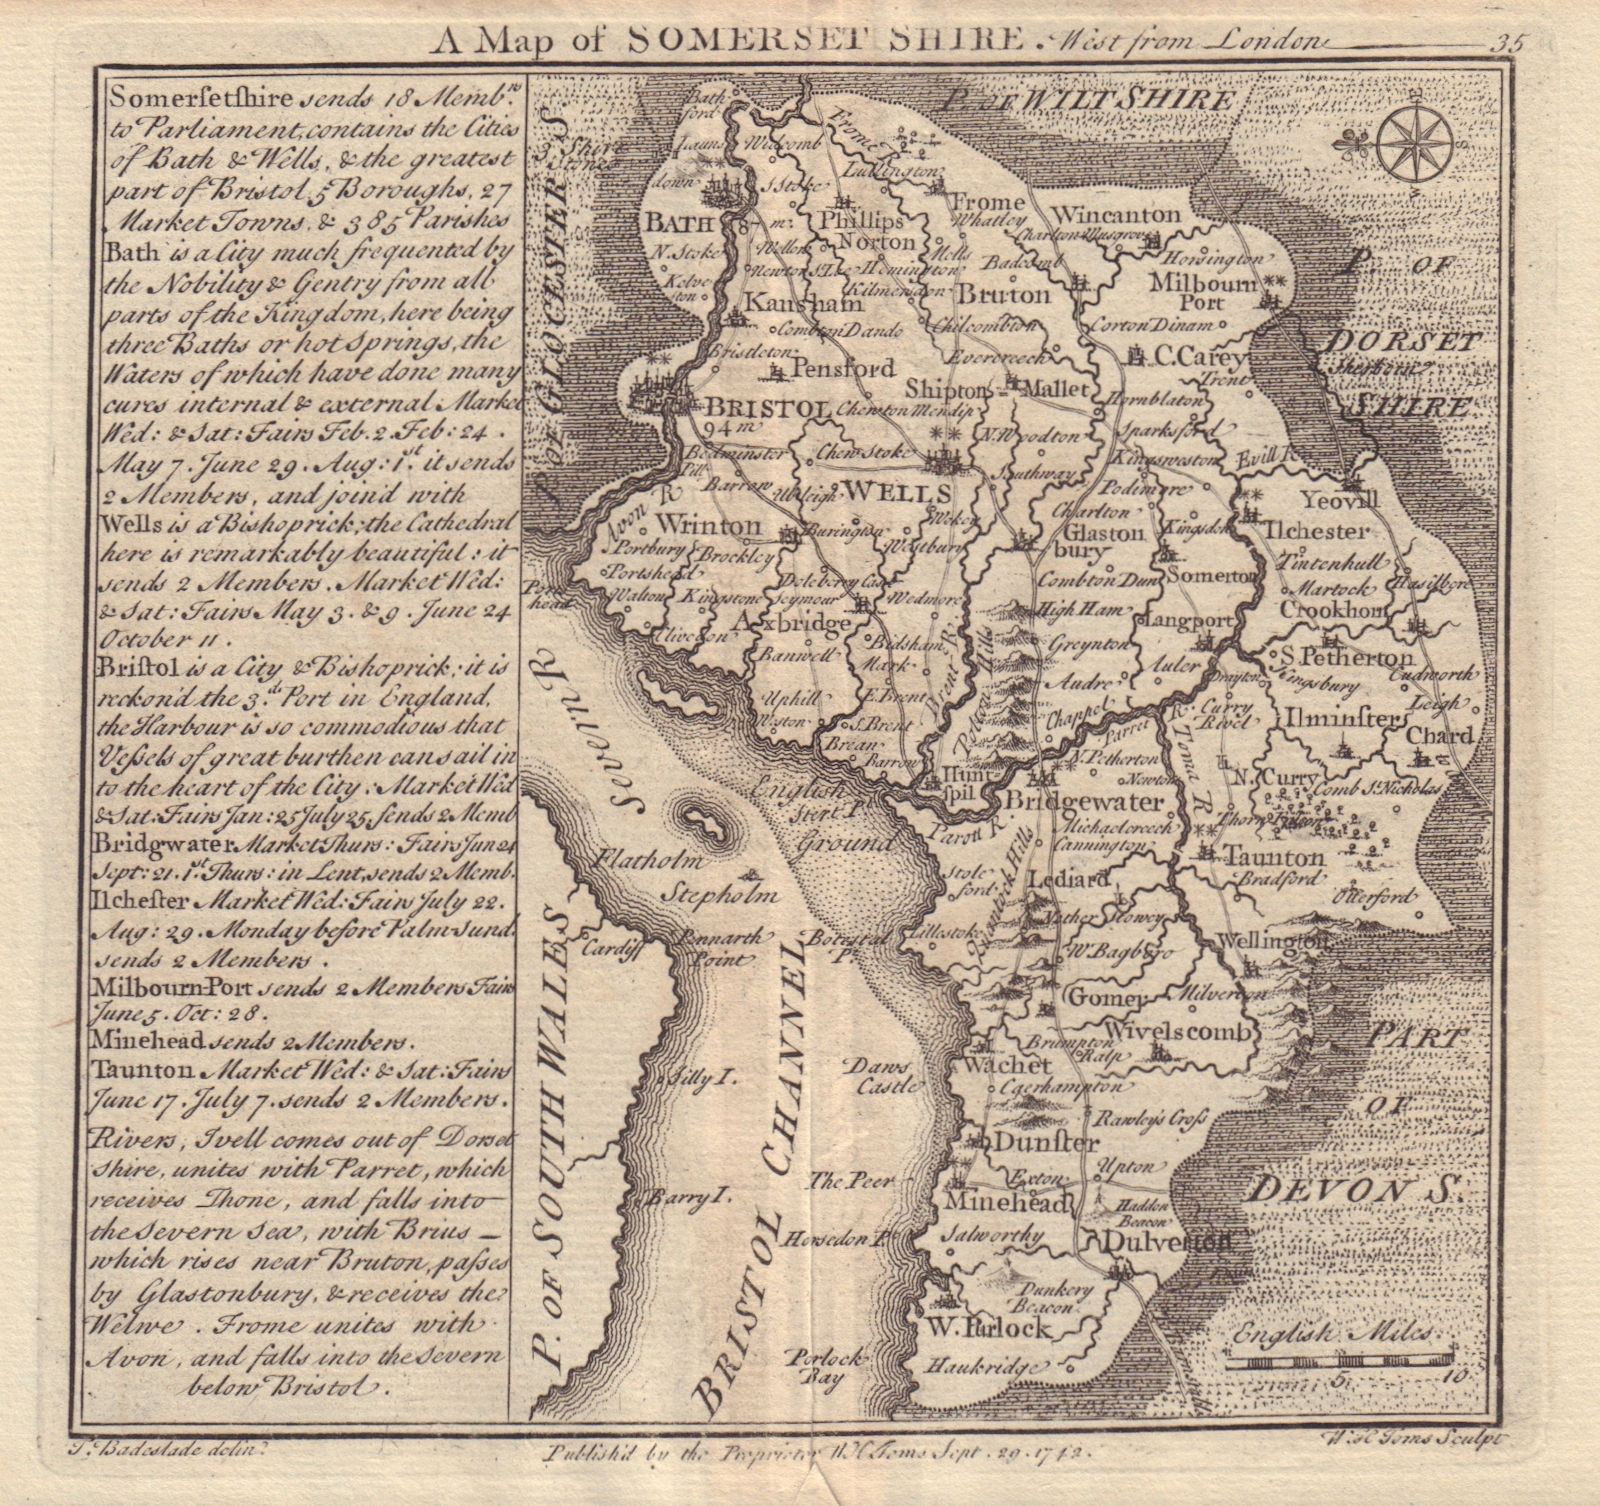 Associate Product Antique county map of Somersetshire by Badeslade & Toms. East orientation 1742